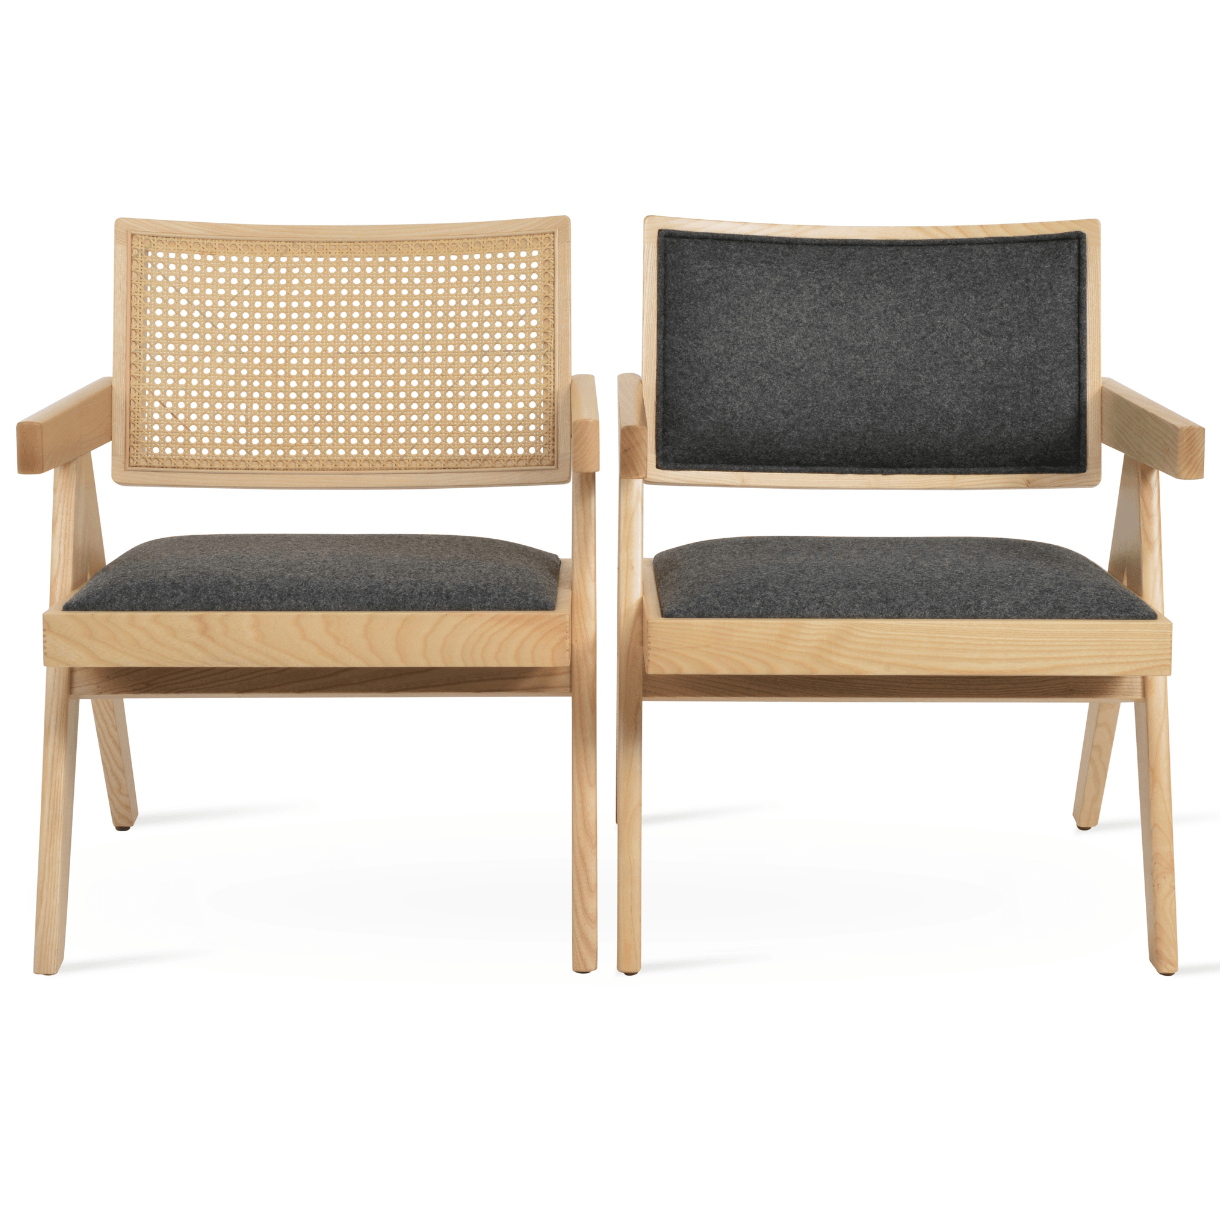 Cane Chairs Pierre J Natural Rattan Lounge Chairs - Your Bar Stools Canada